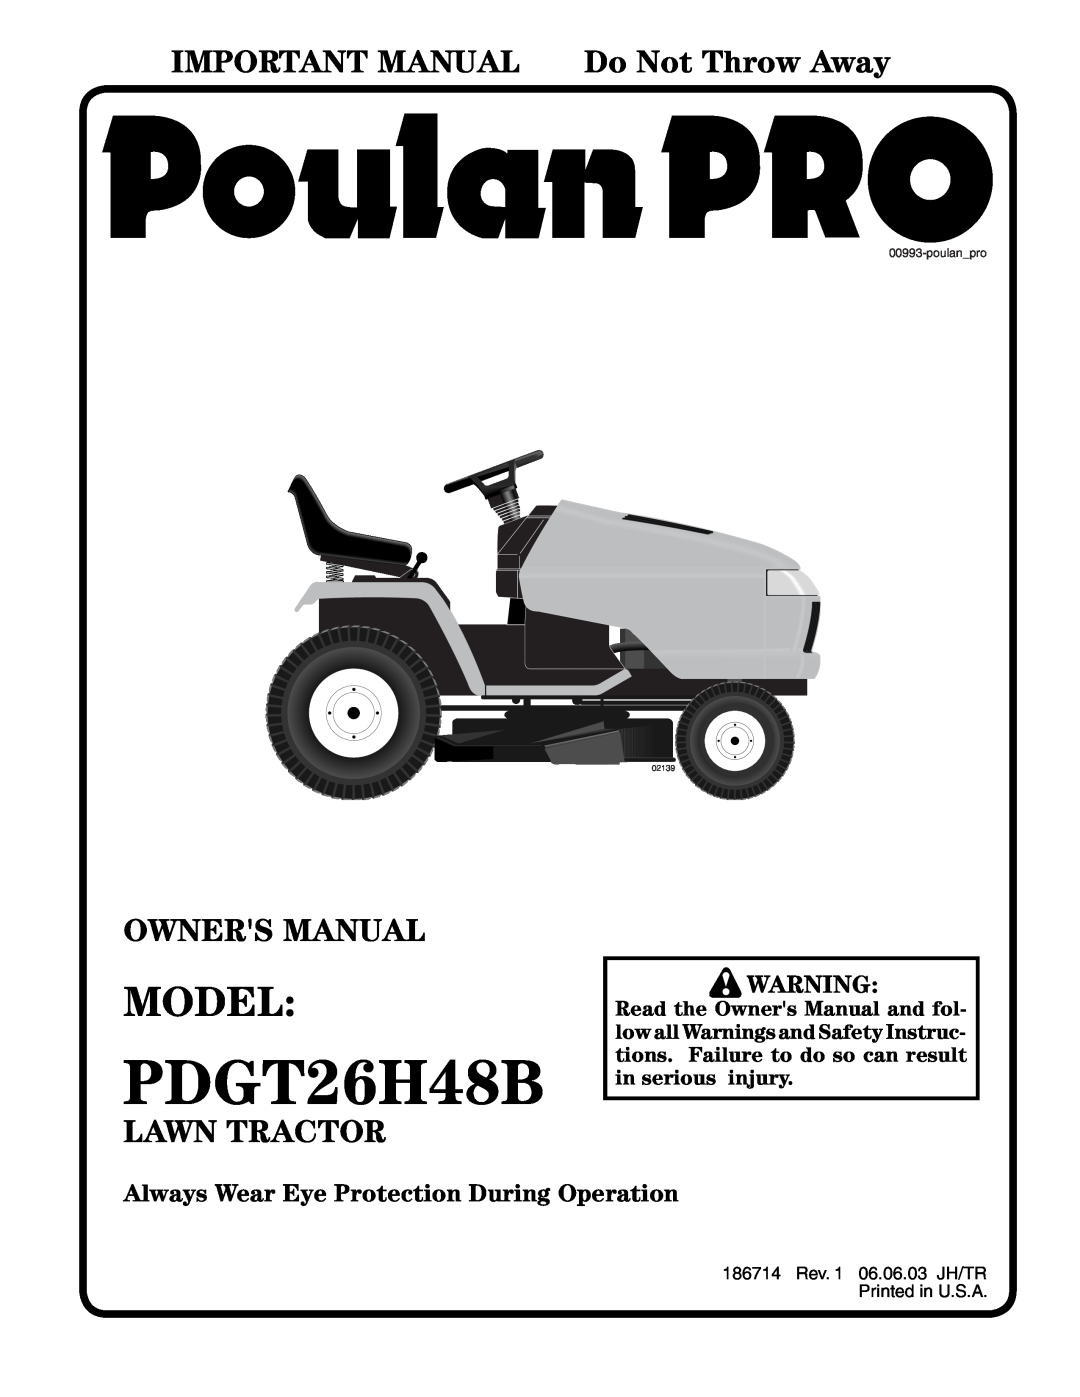 Poulan PDGT26H48B owner manual Model, IMPORTANT MANUAL Do Not Throw Away, Lawn Tractor, 02139 